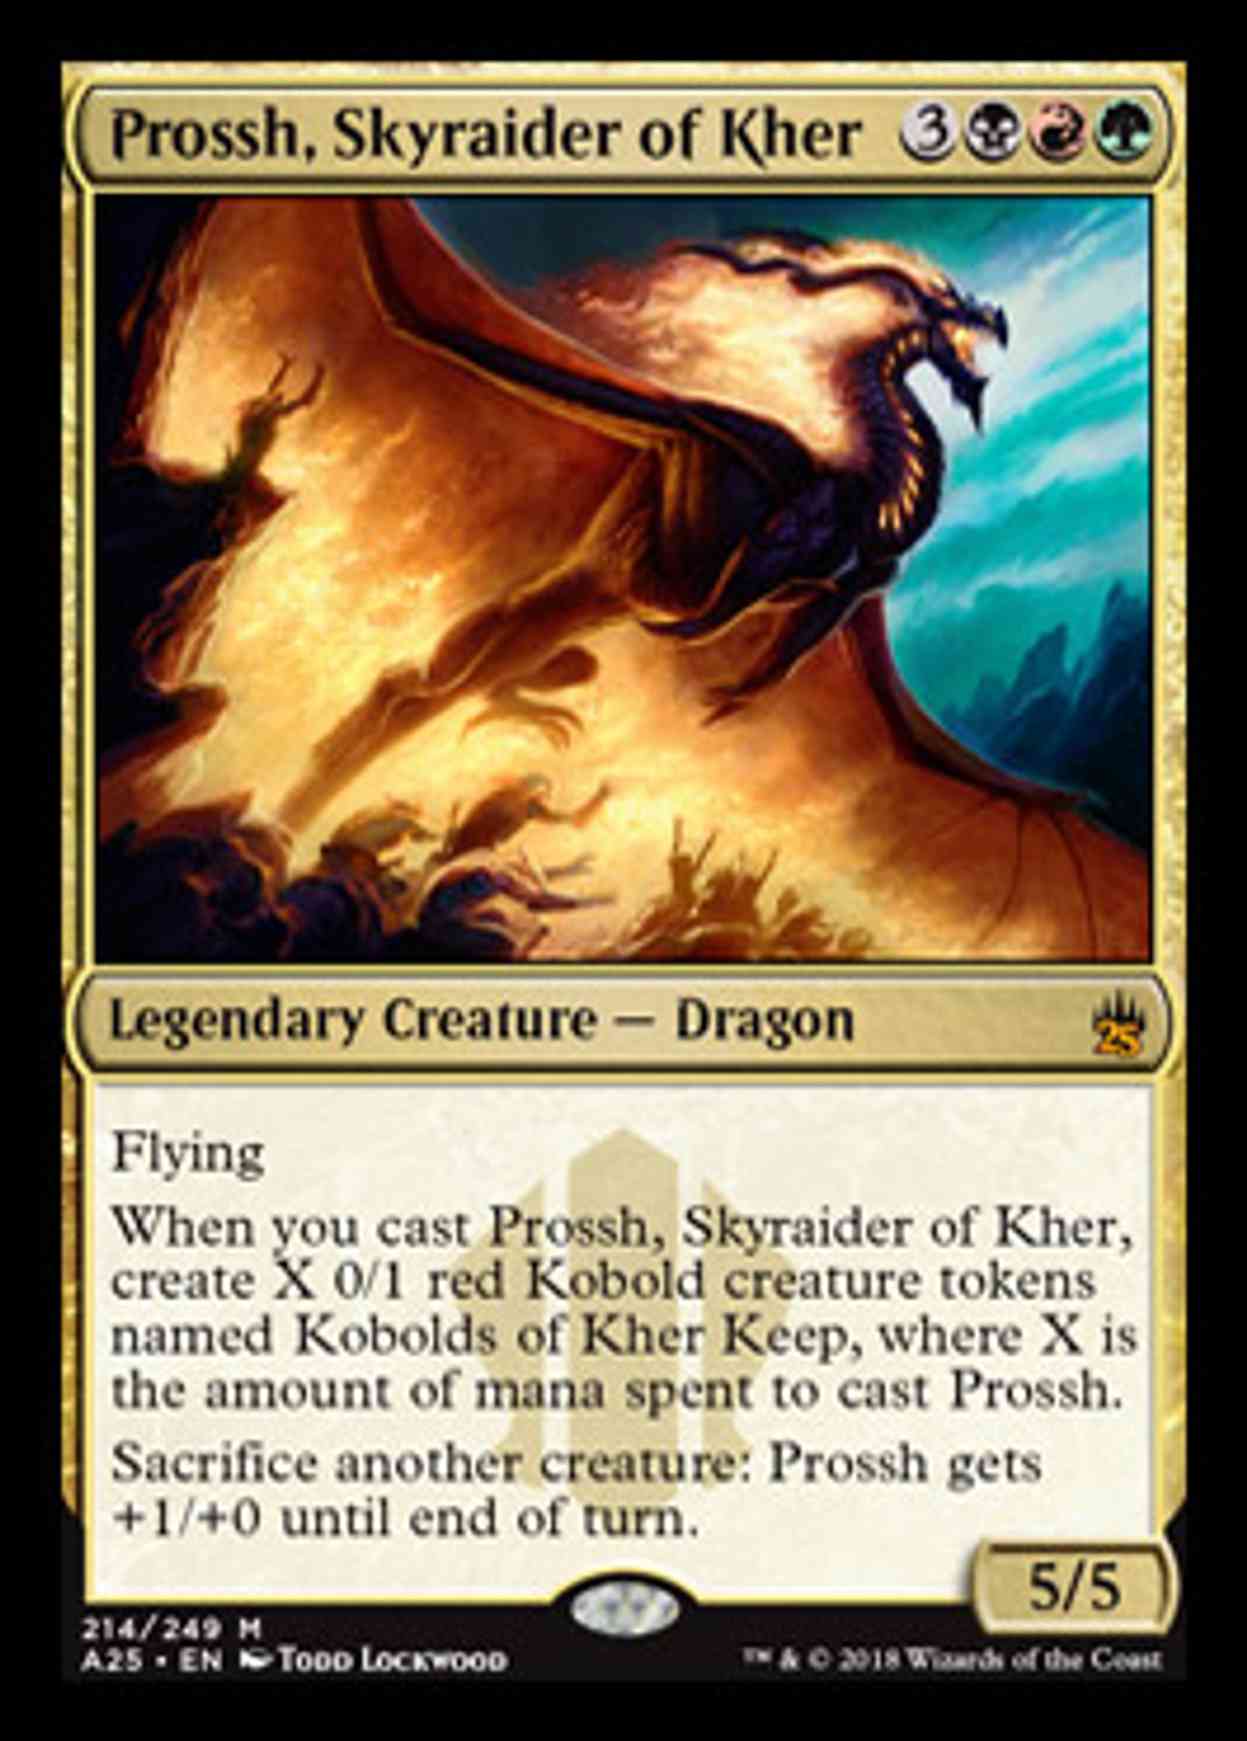 Prossh, Skyraider of Kher magic card front